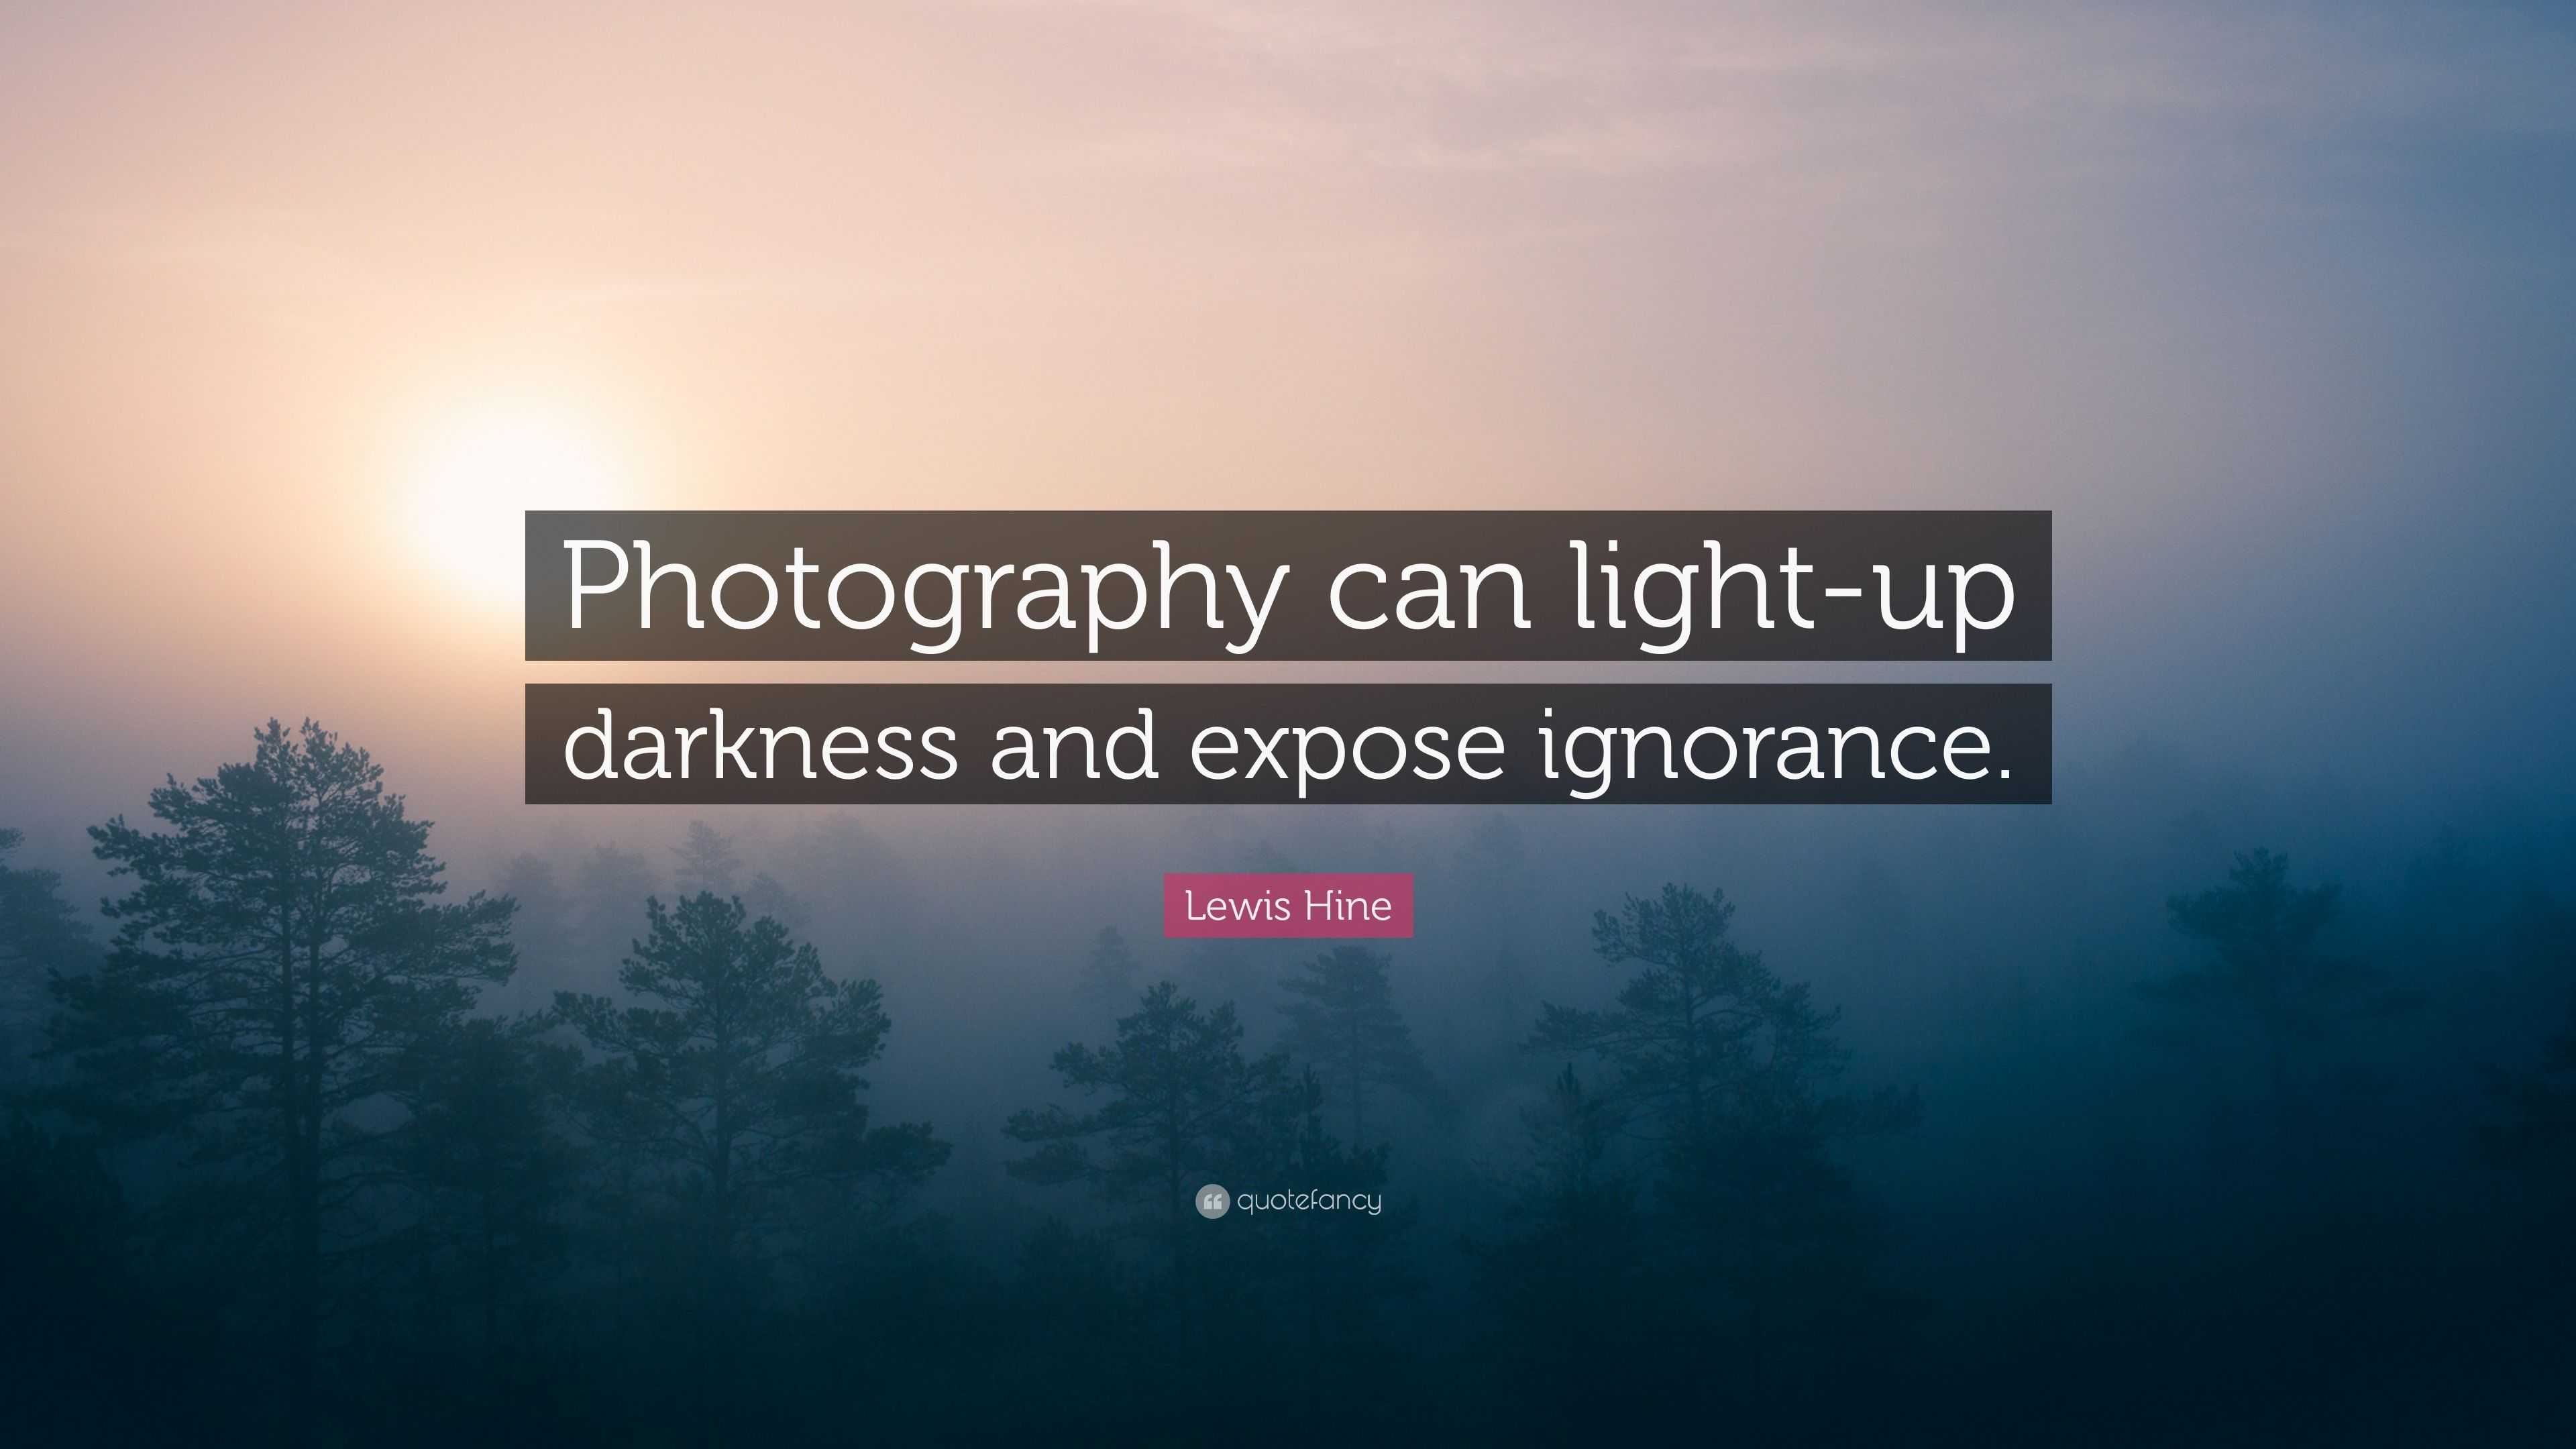 Lewis Hine Quote: "Photography can light-up darkness and expose ignorance."